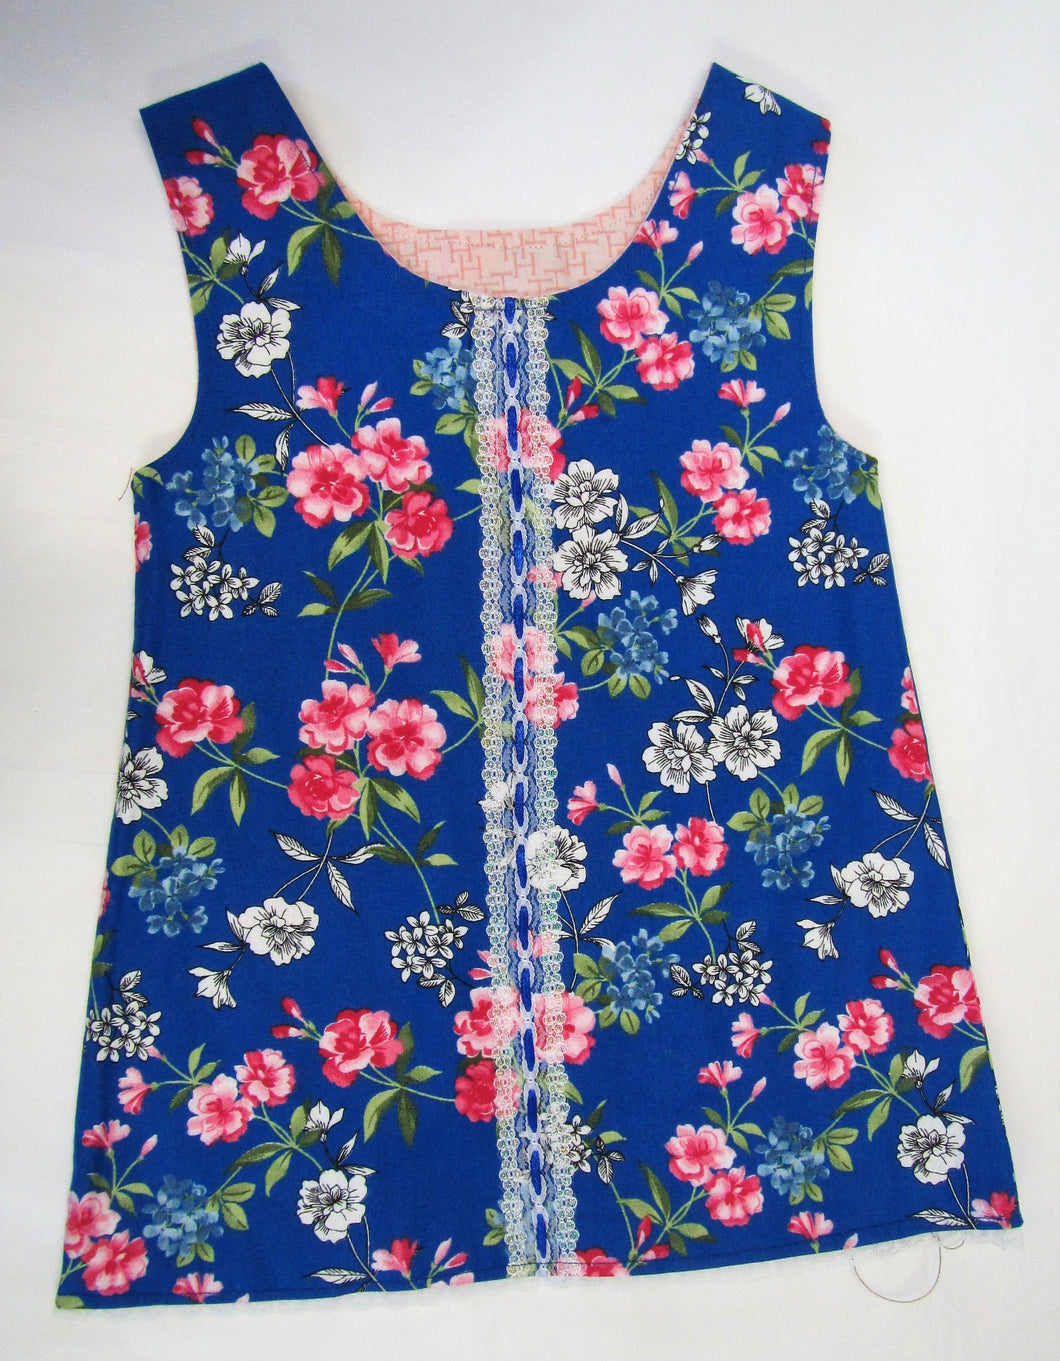 Hand crafted blue and pink floral pinafore 9-12 months